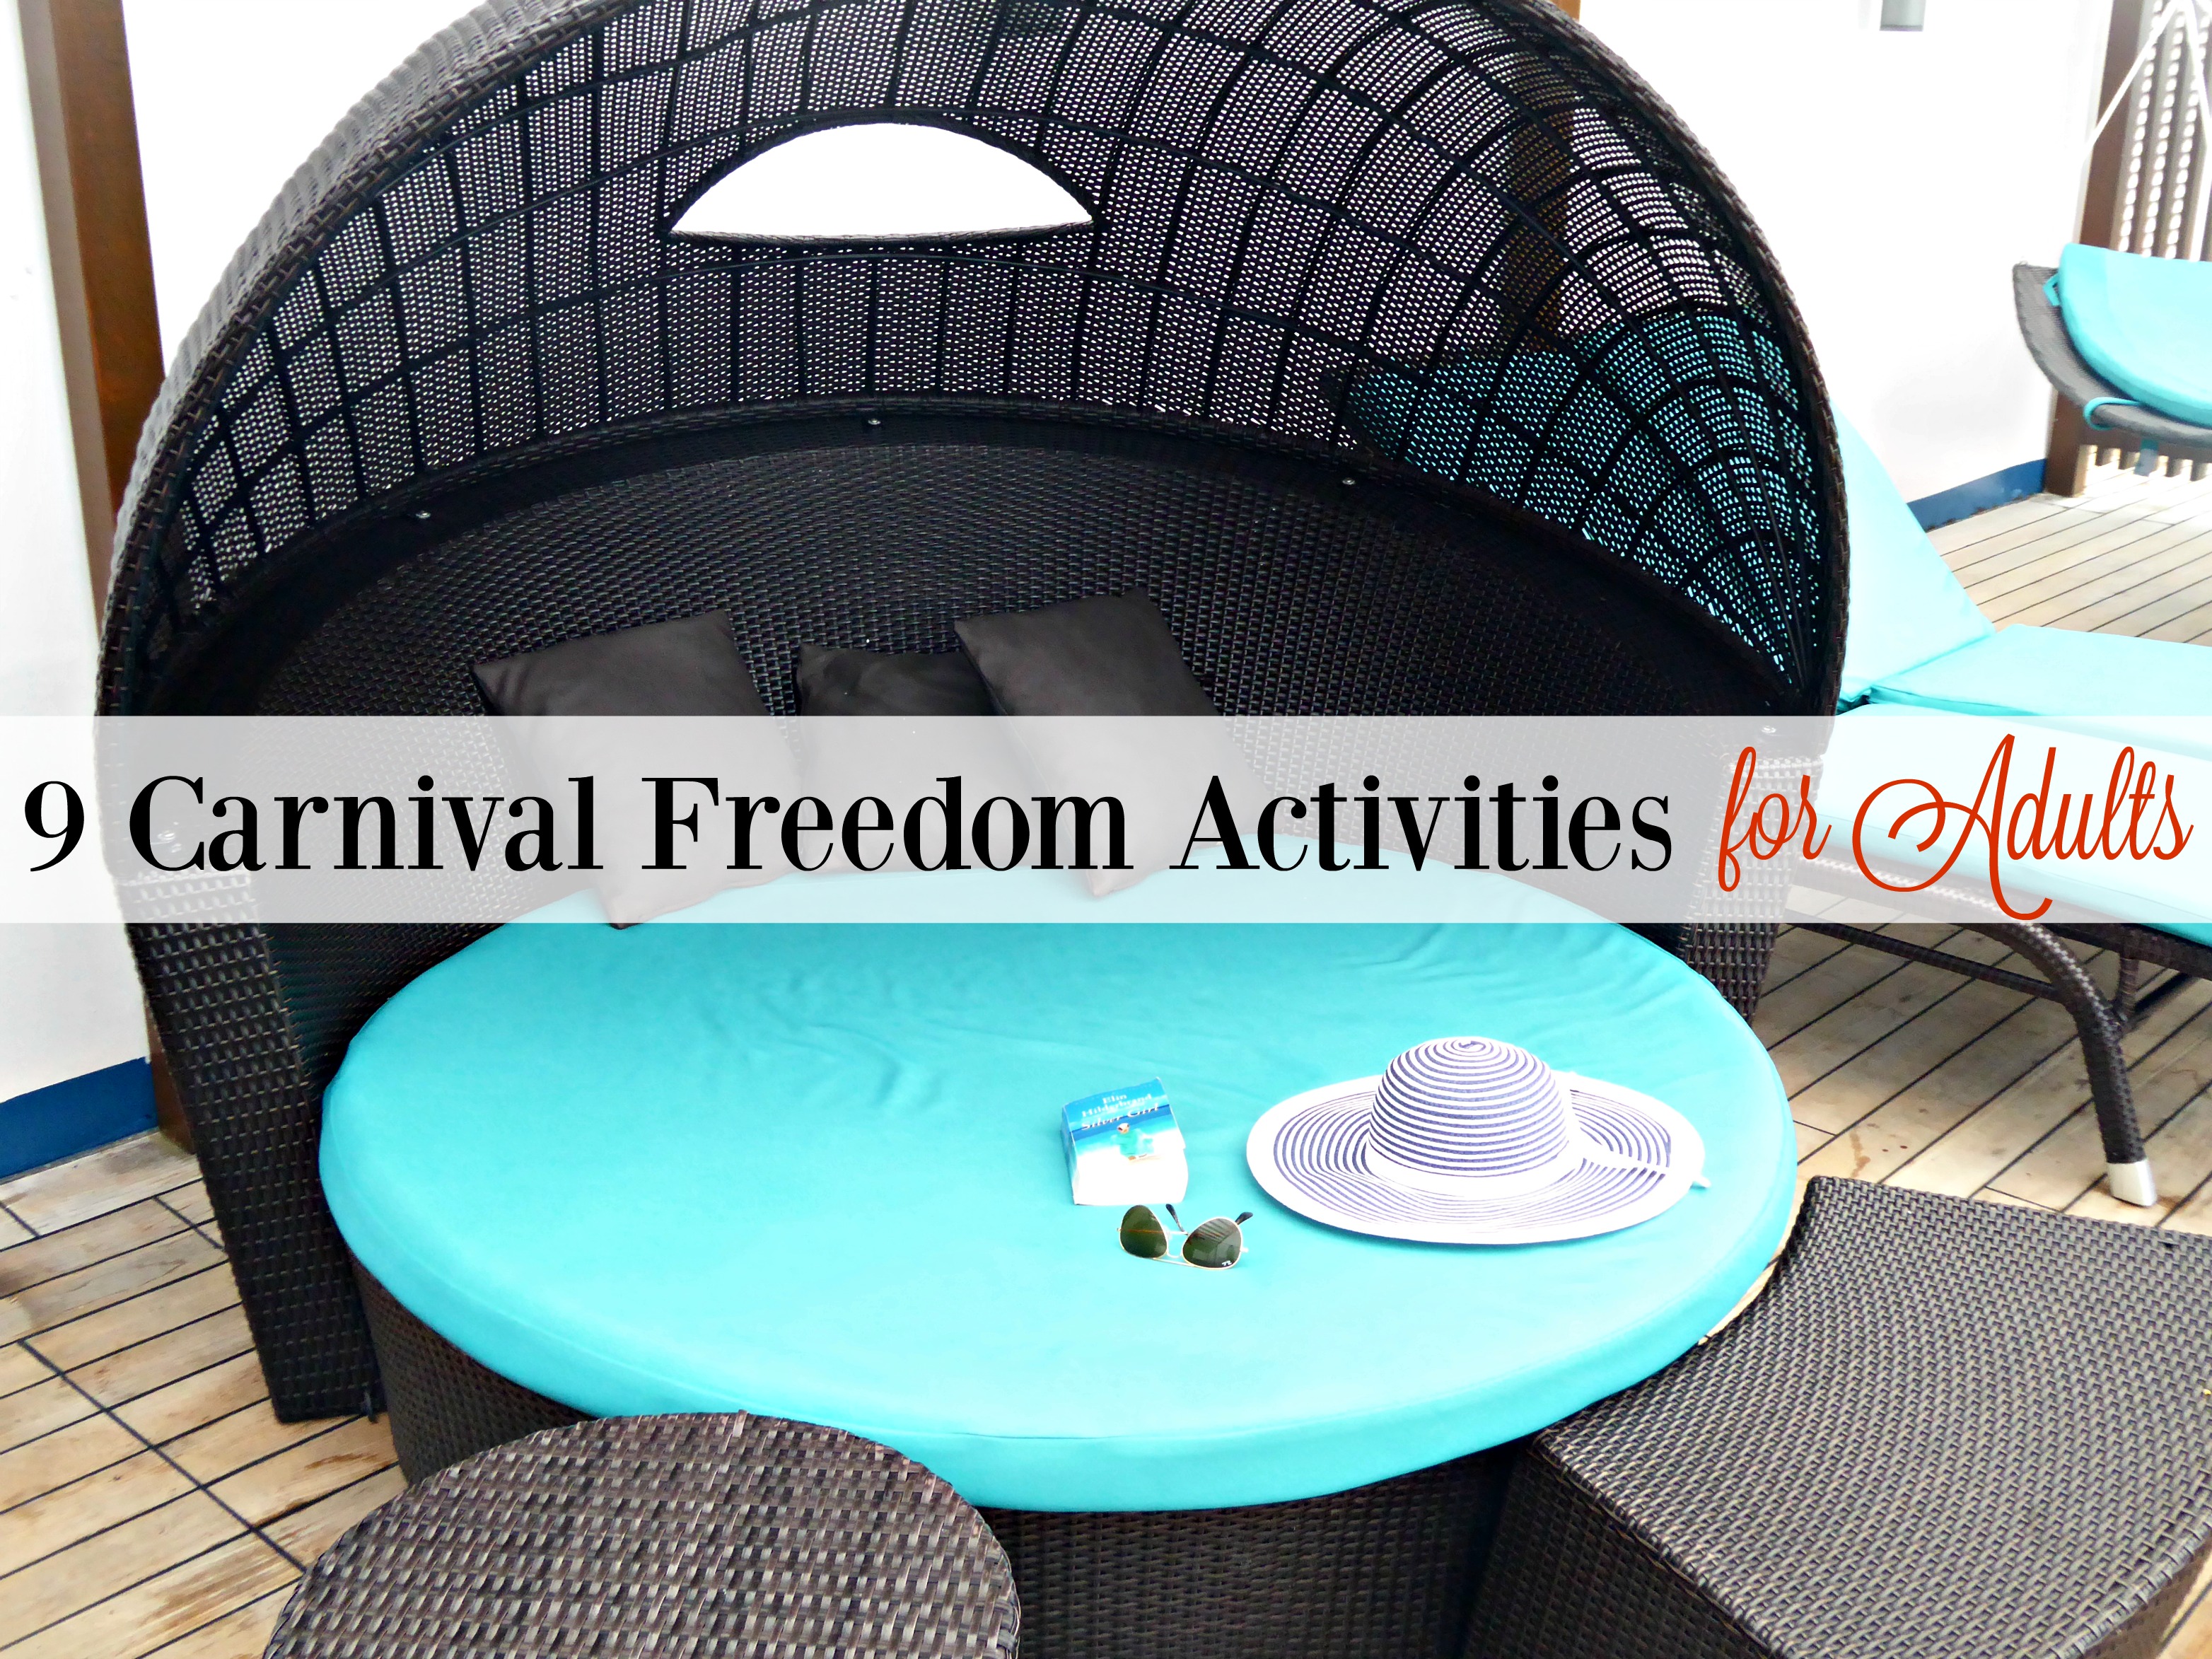 9 Carnival Freedom Activities for Adults